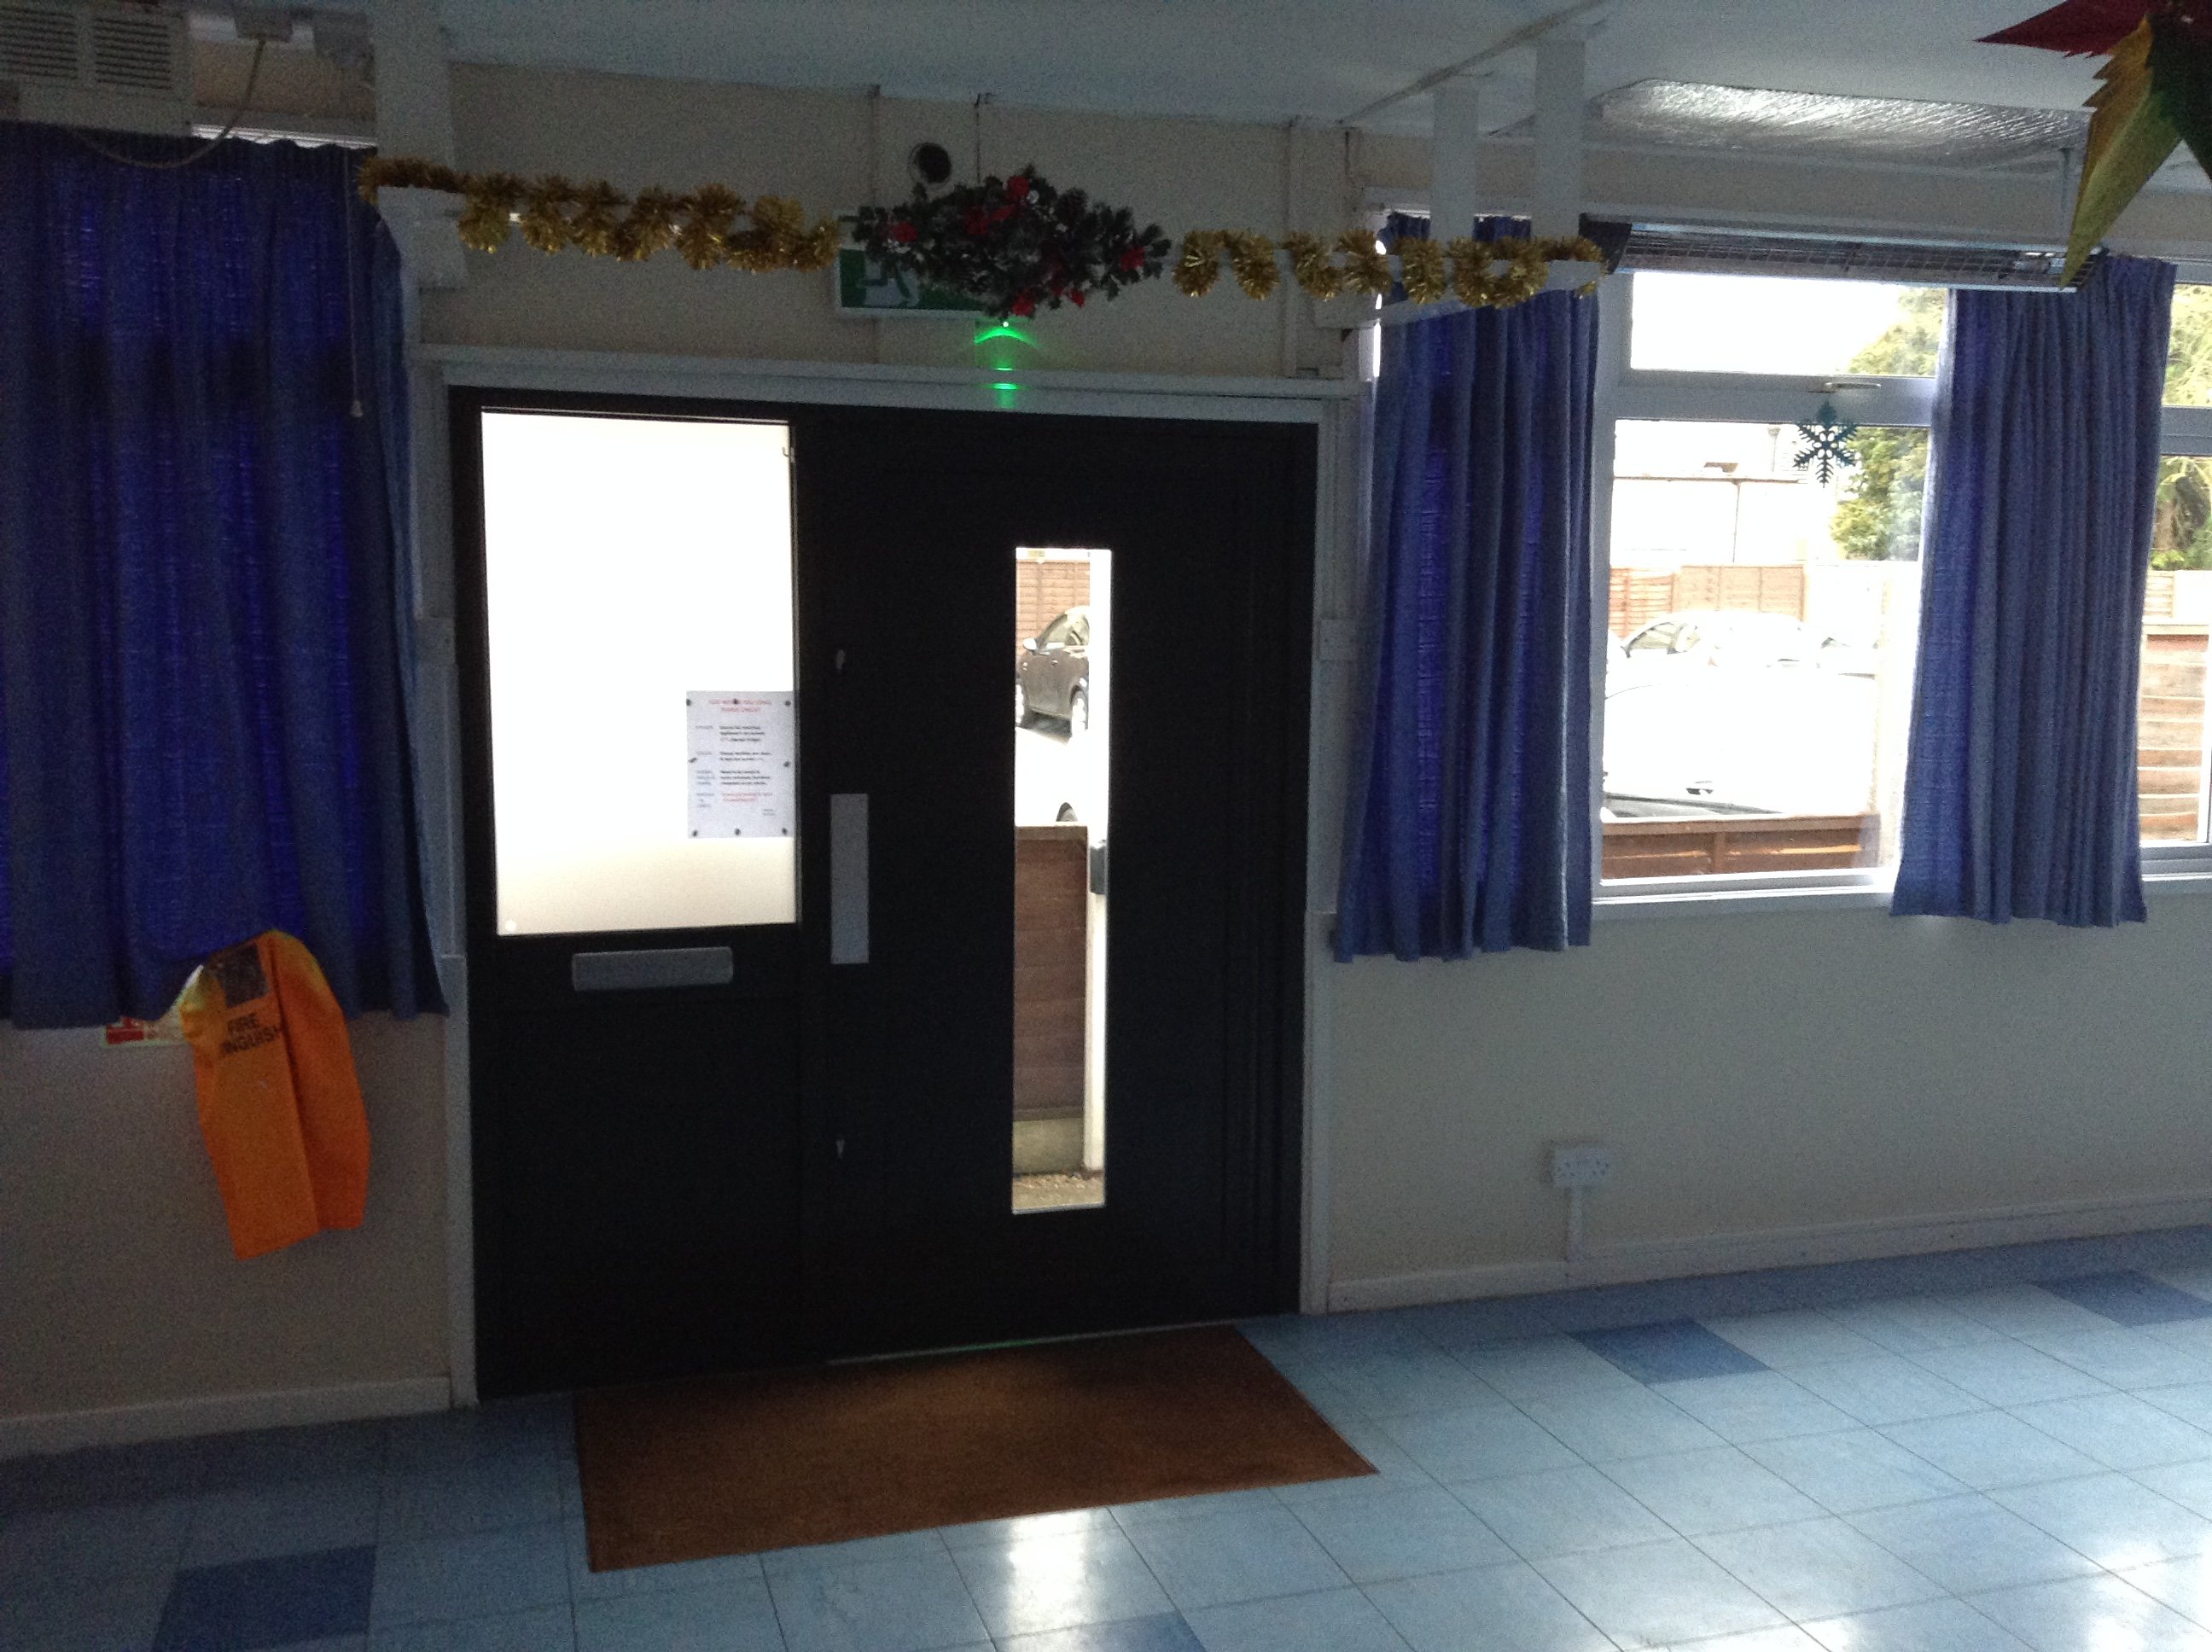 Our new door! Thanks to the Beds & Luton CFLLA Ltd Fund